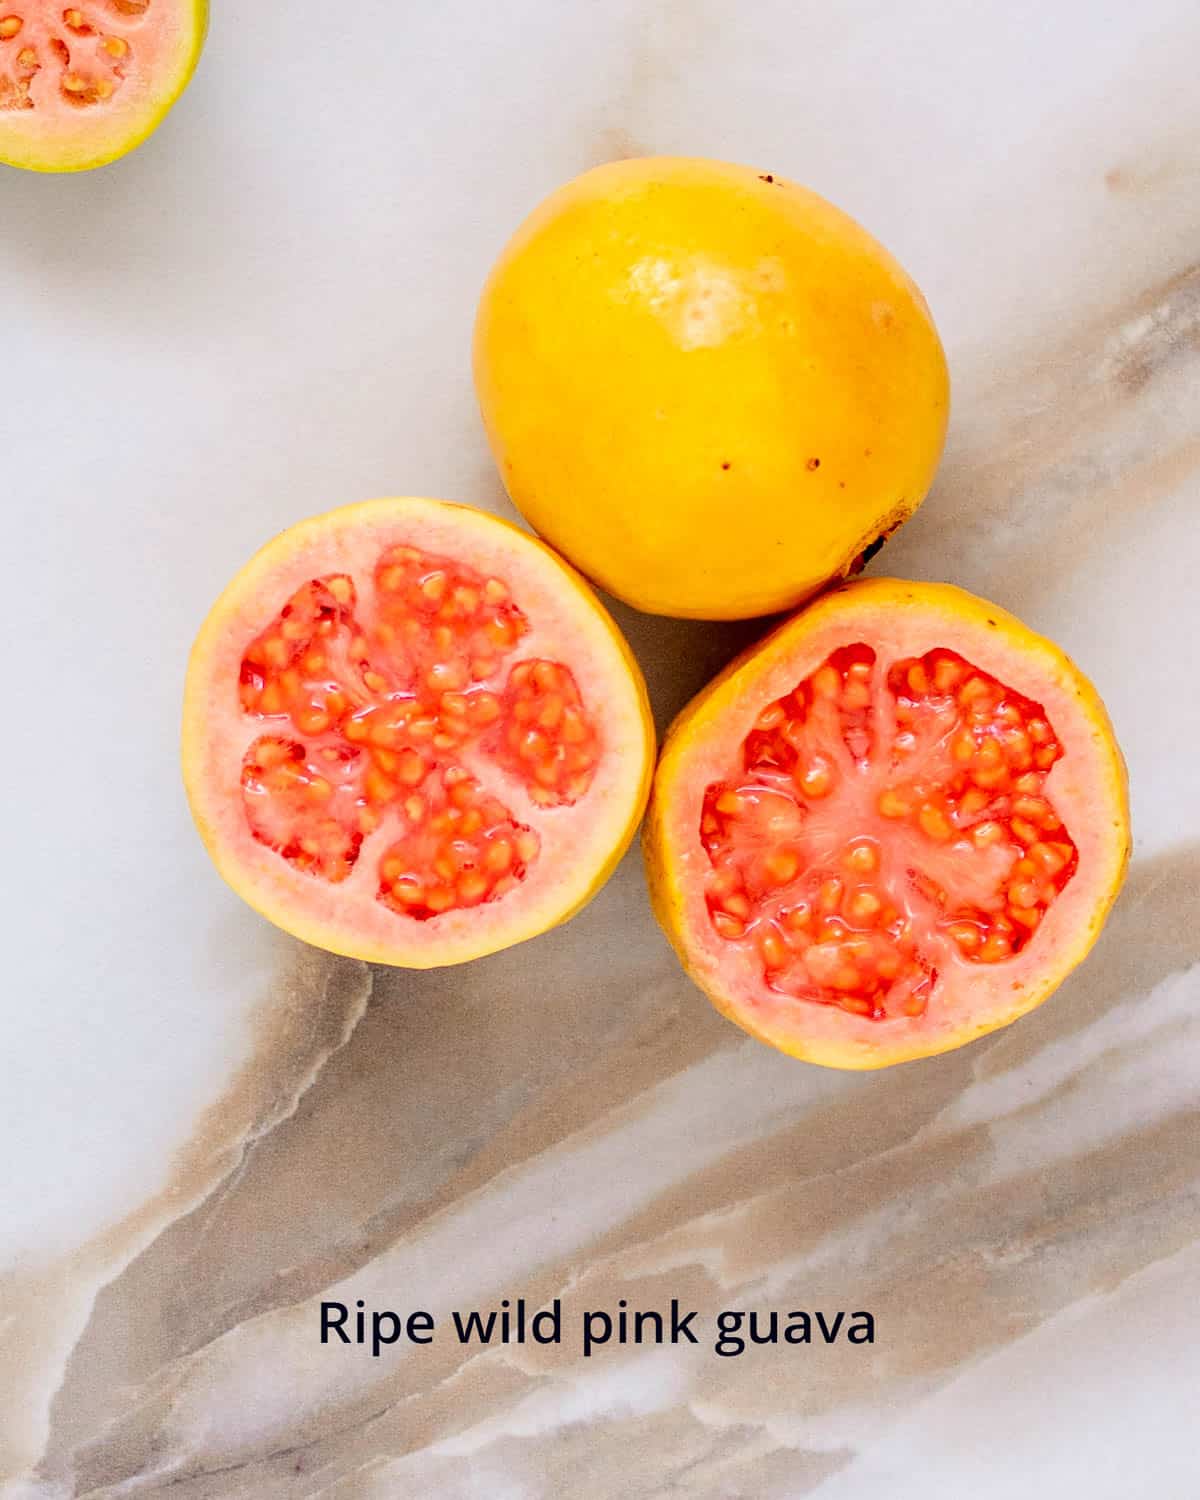 Fully ripe guava with yellow skin and soft pink interior.